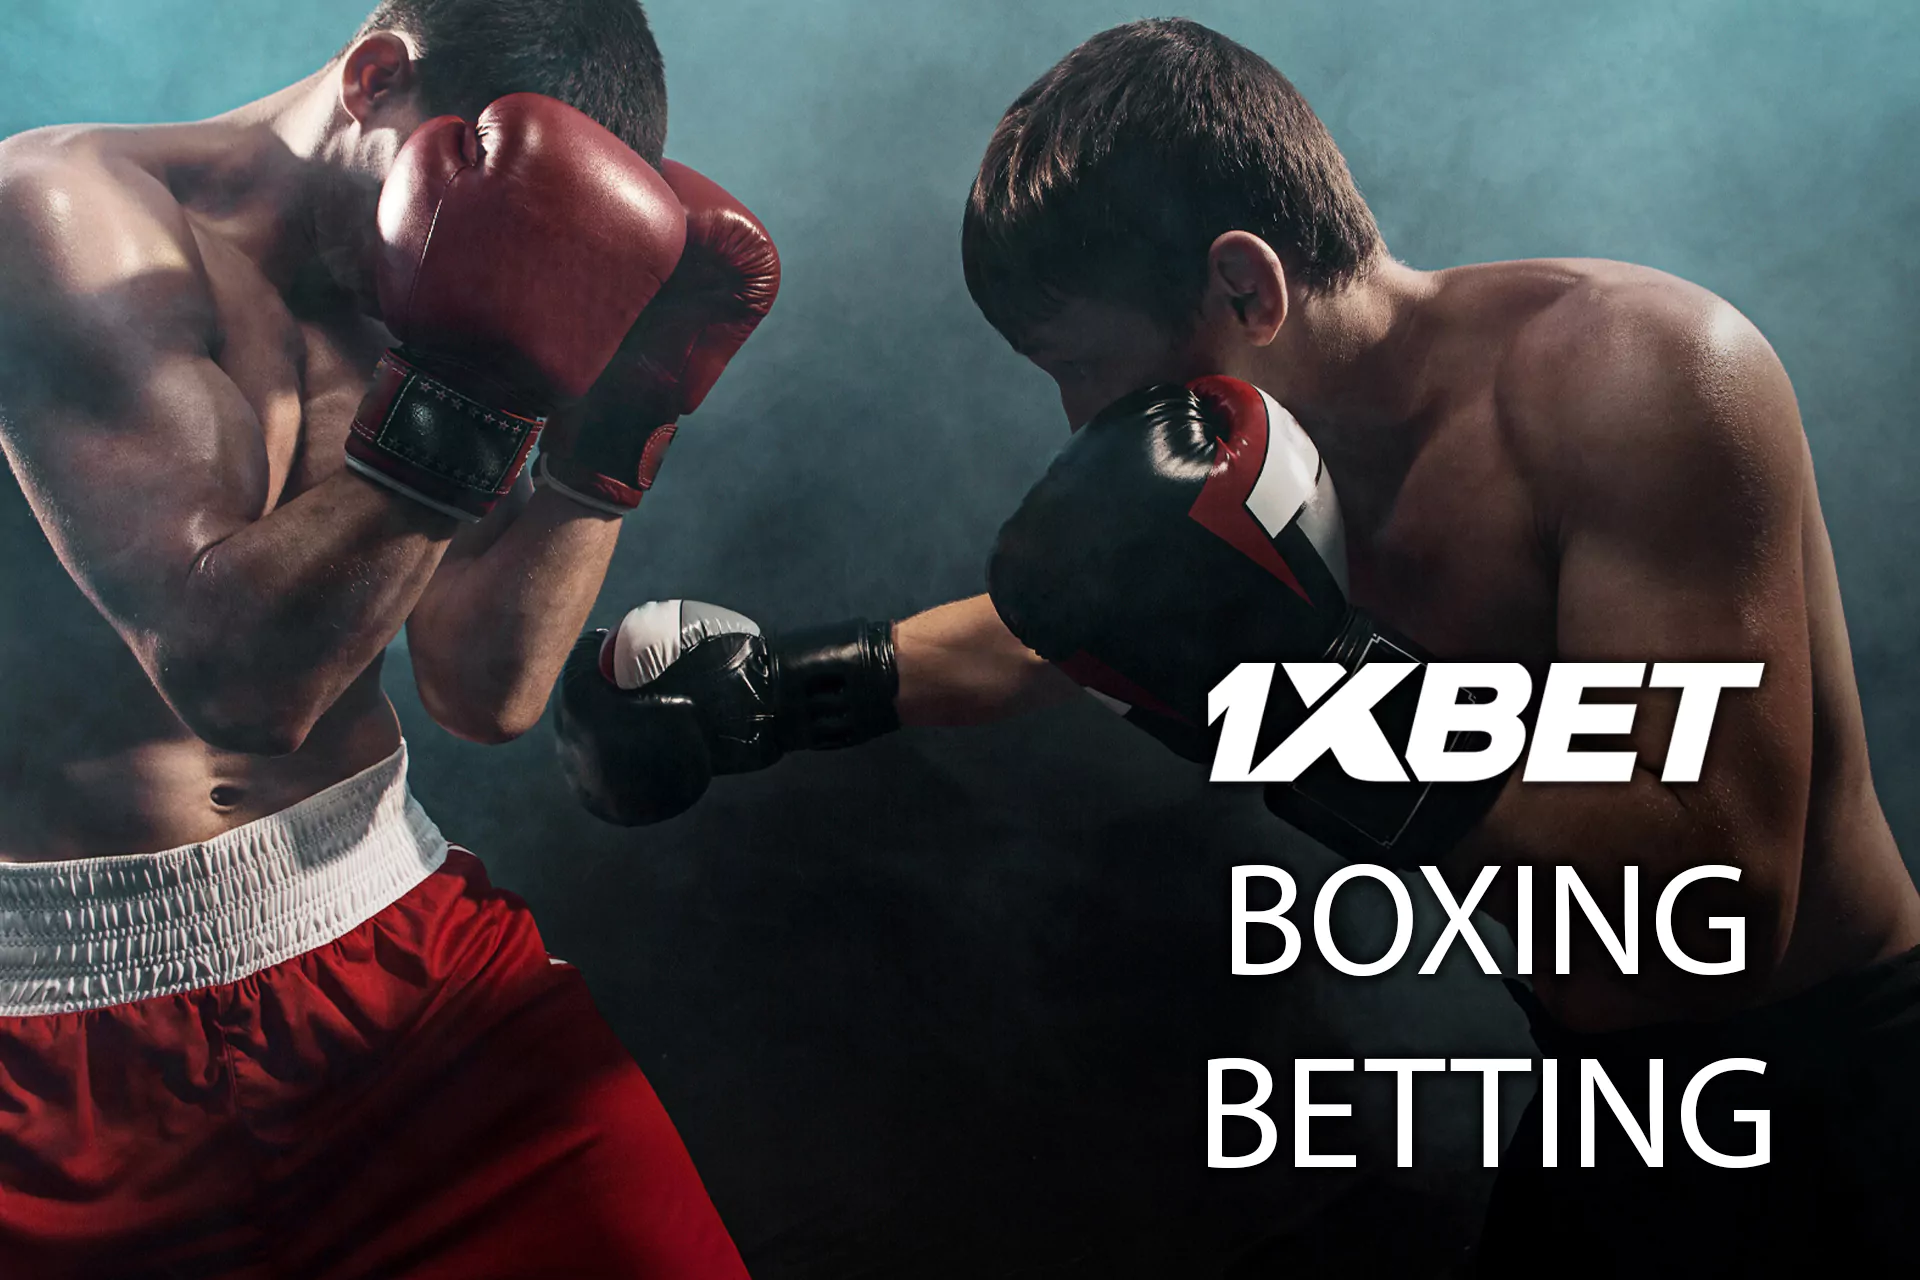 Users of 1xBet in India can bet on boxing online.